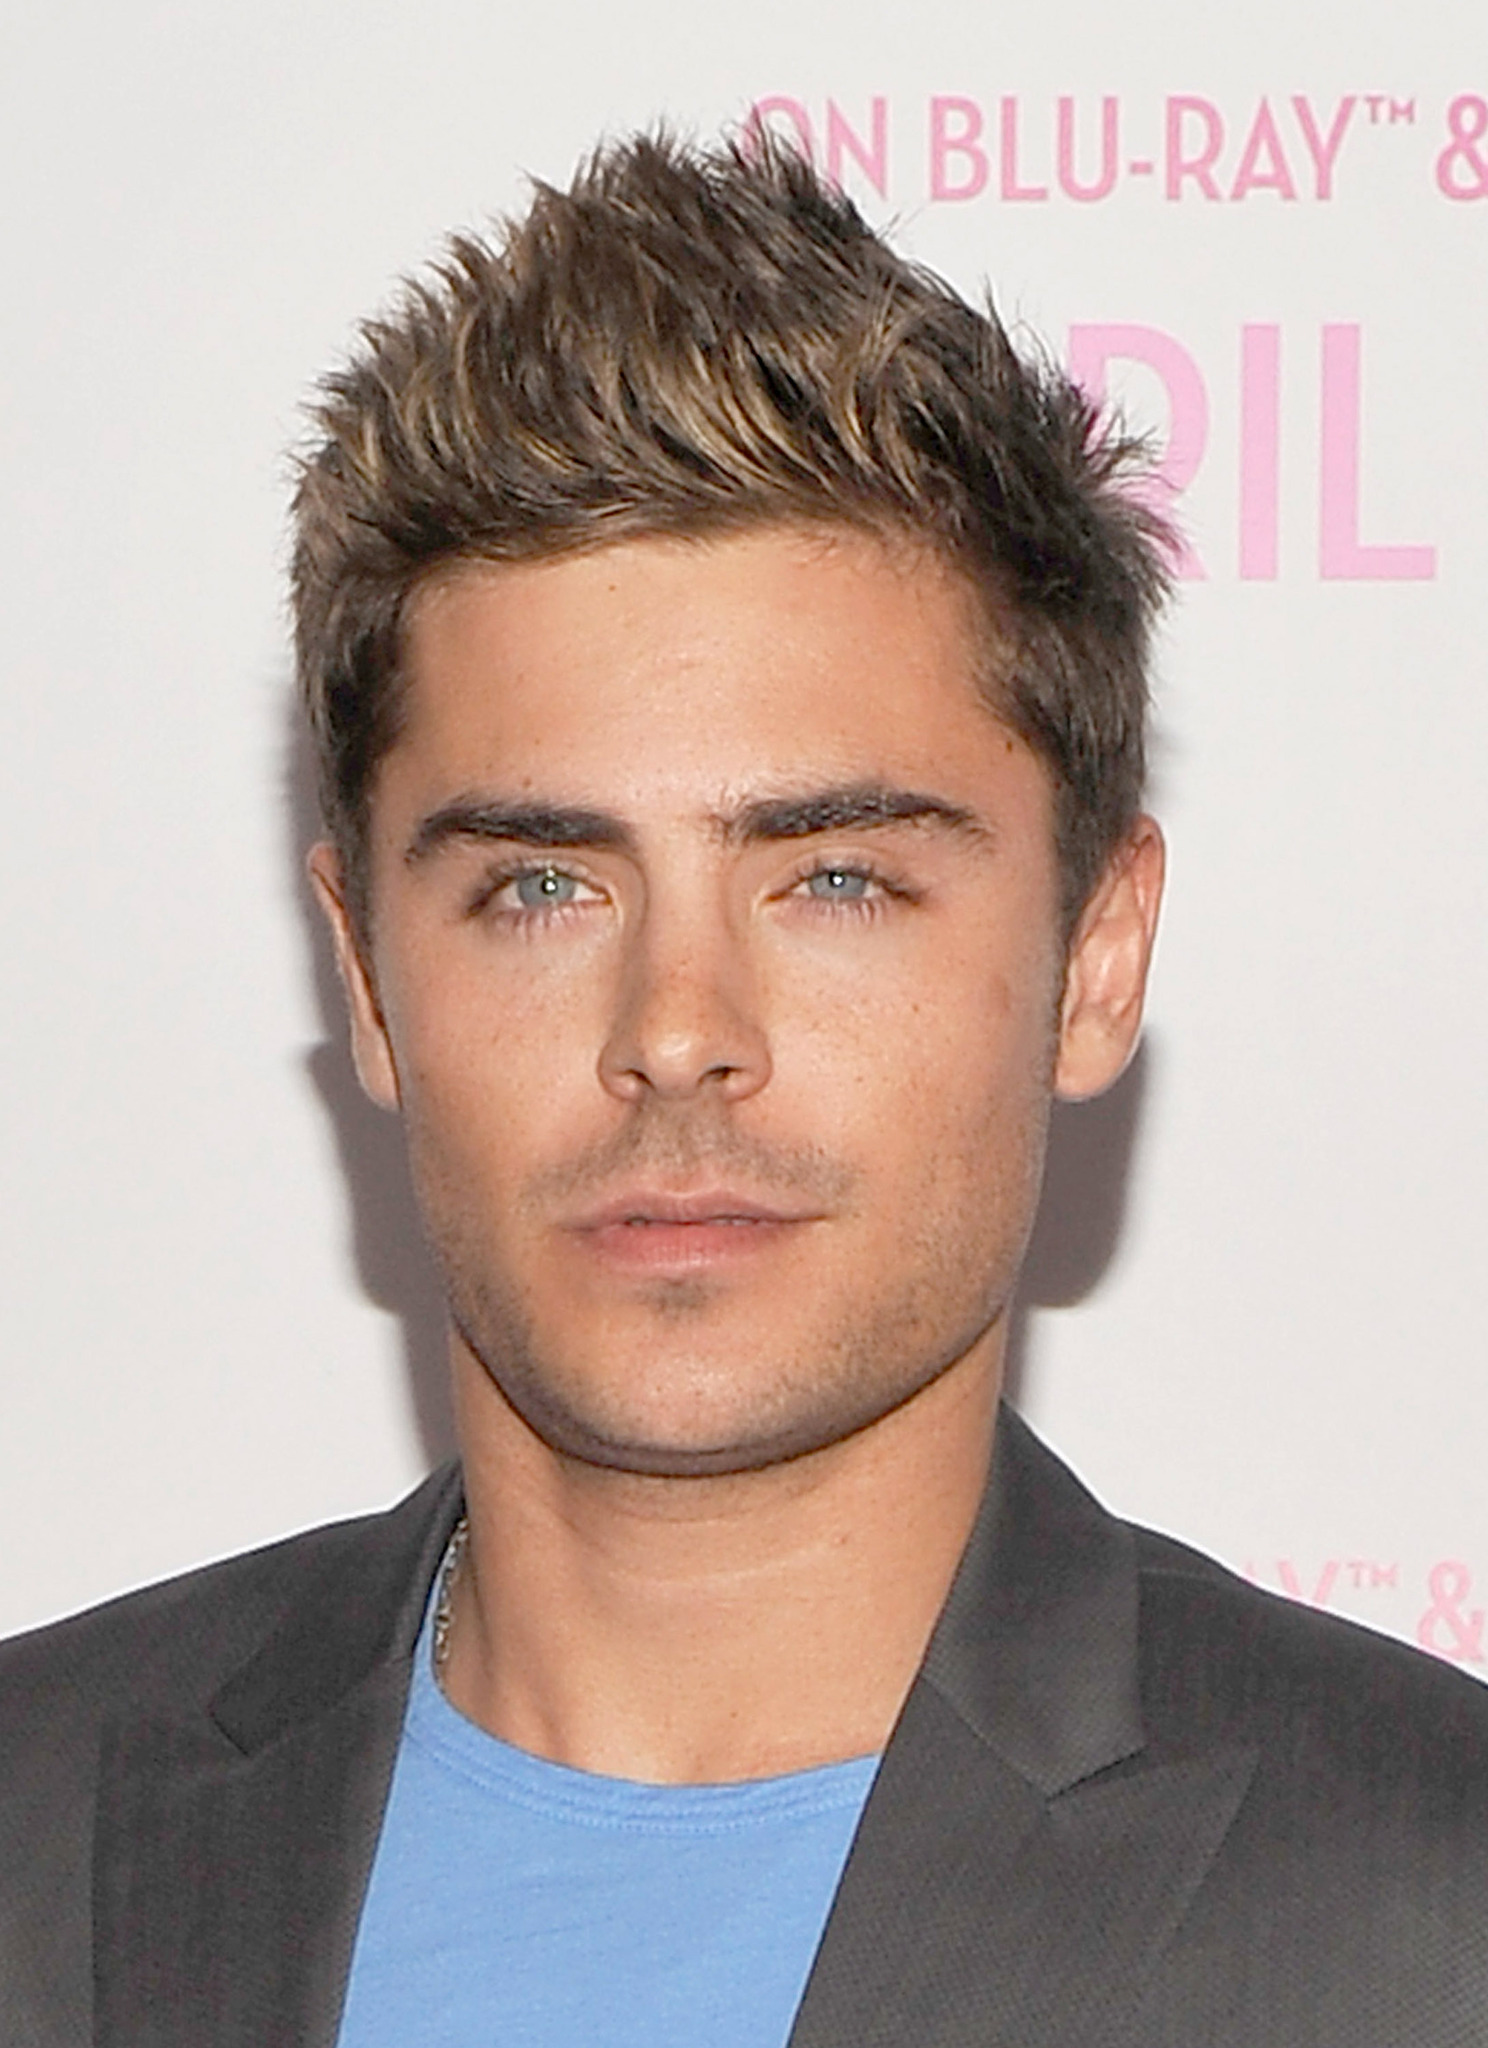 Zac Efron at event of Sharpay's Fabulous Adventure (2011)